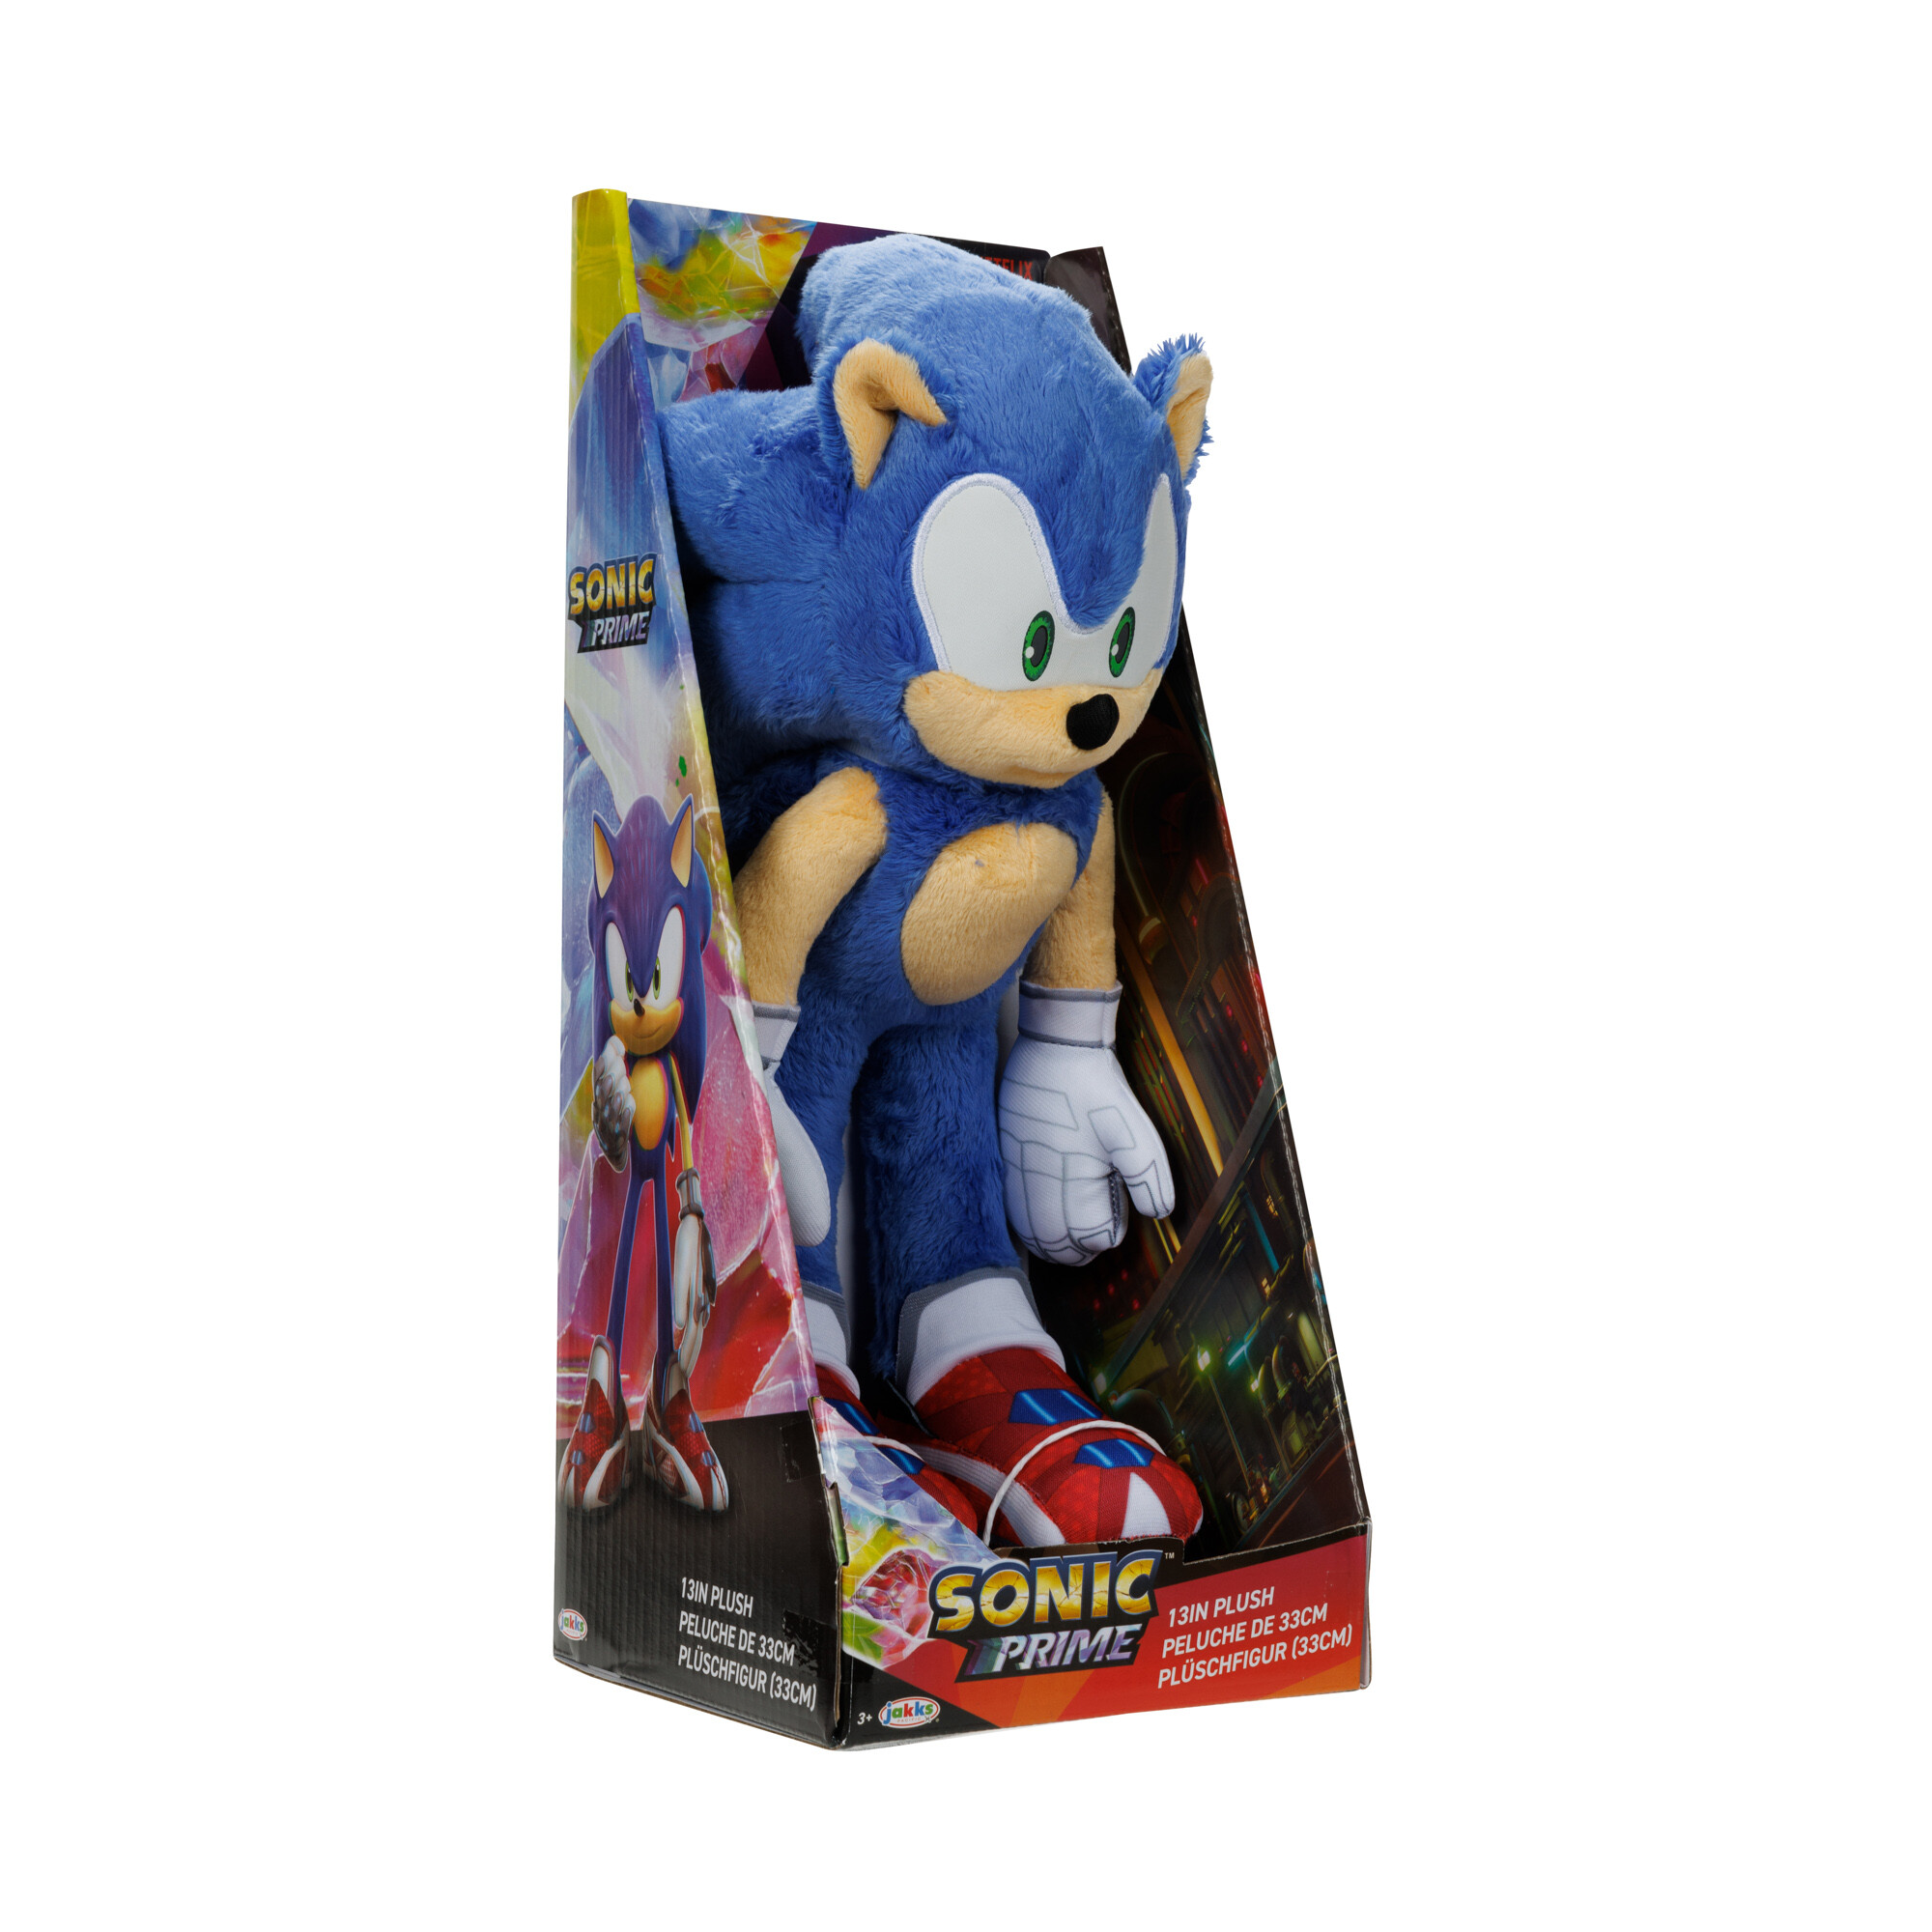 Licensed Sonic Prime Plush Toy and 5 Action Figures Coming July - Merch -  Sonic Stadium